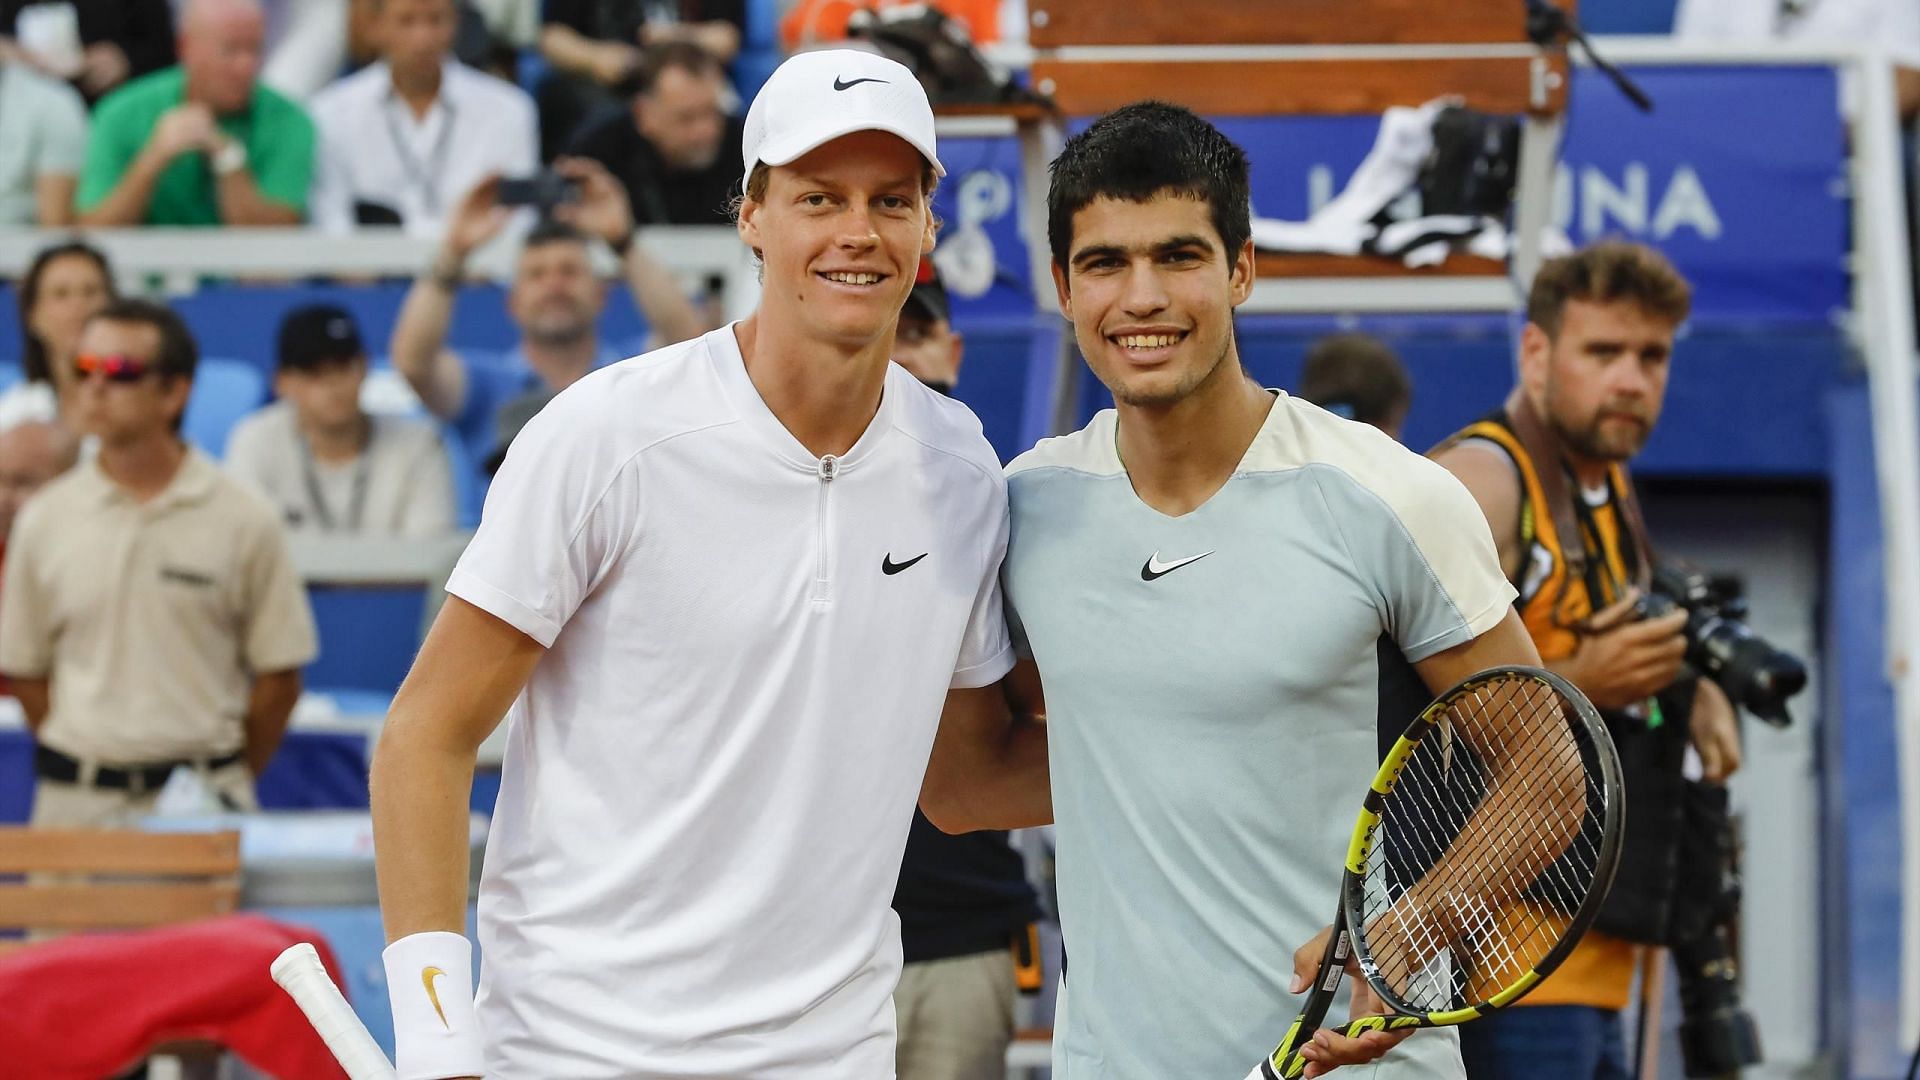 Alcaraz's No. 1 Chase, Sinner's Chance For Huge Rankings Jump, ATP Tour